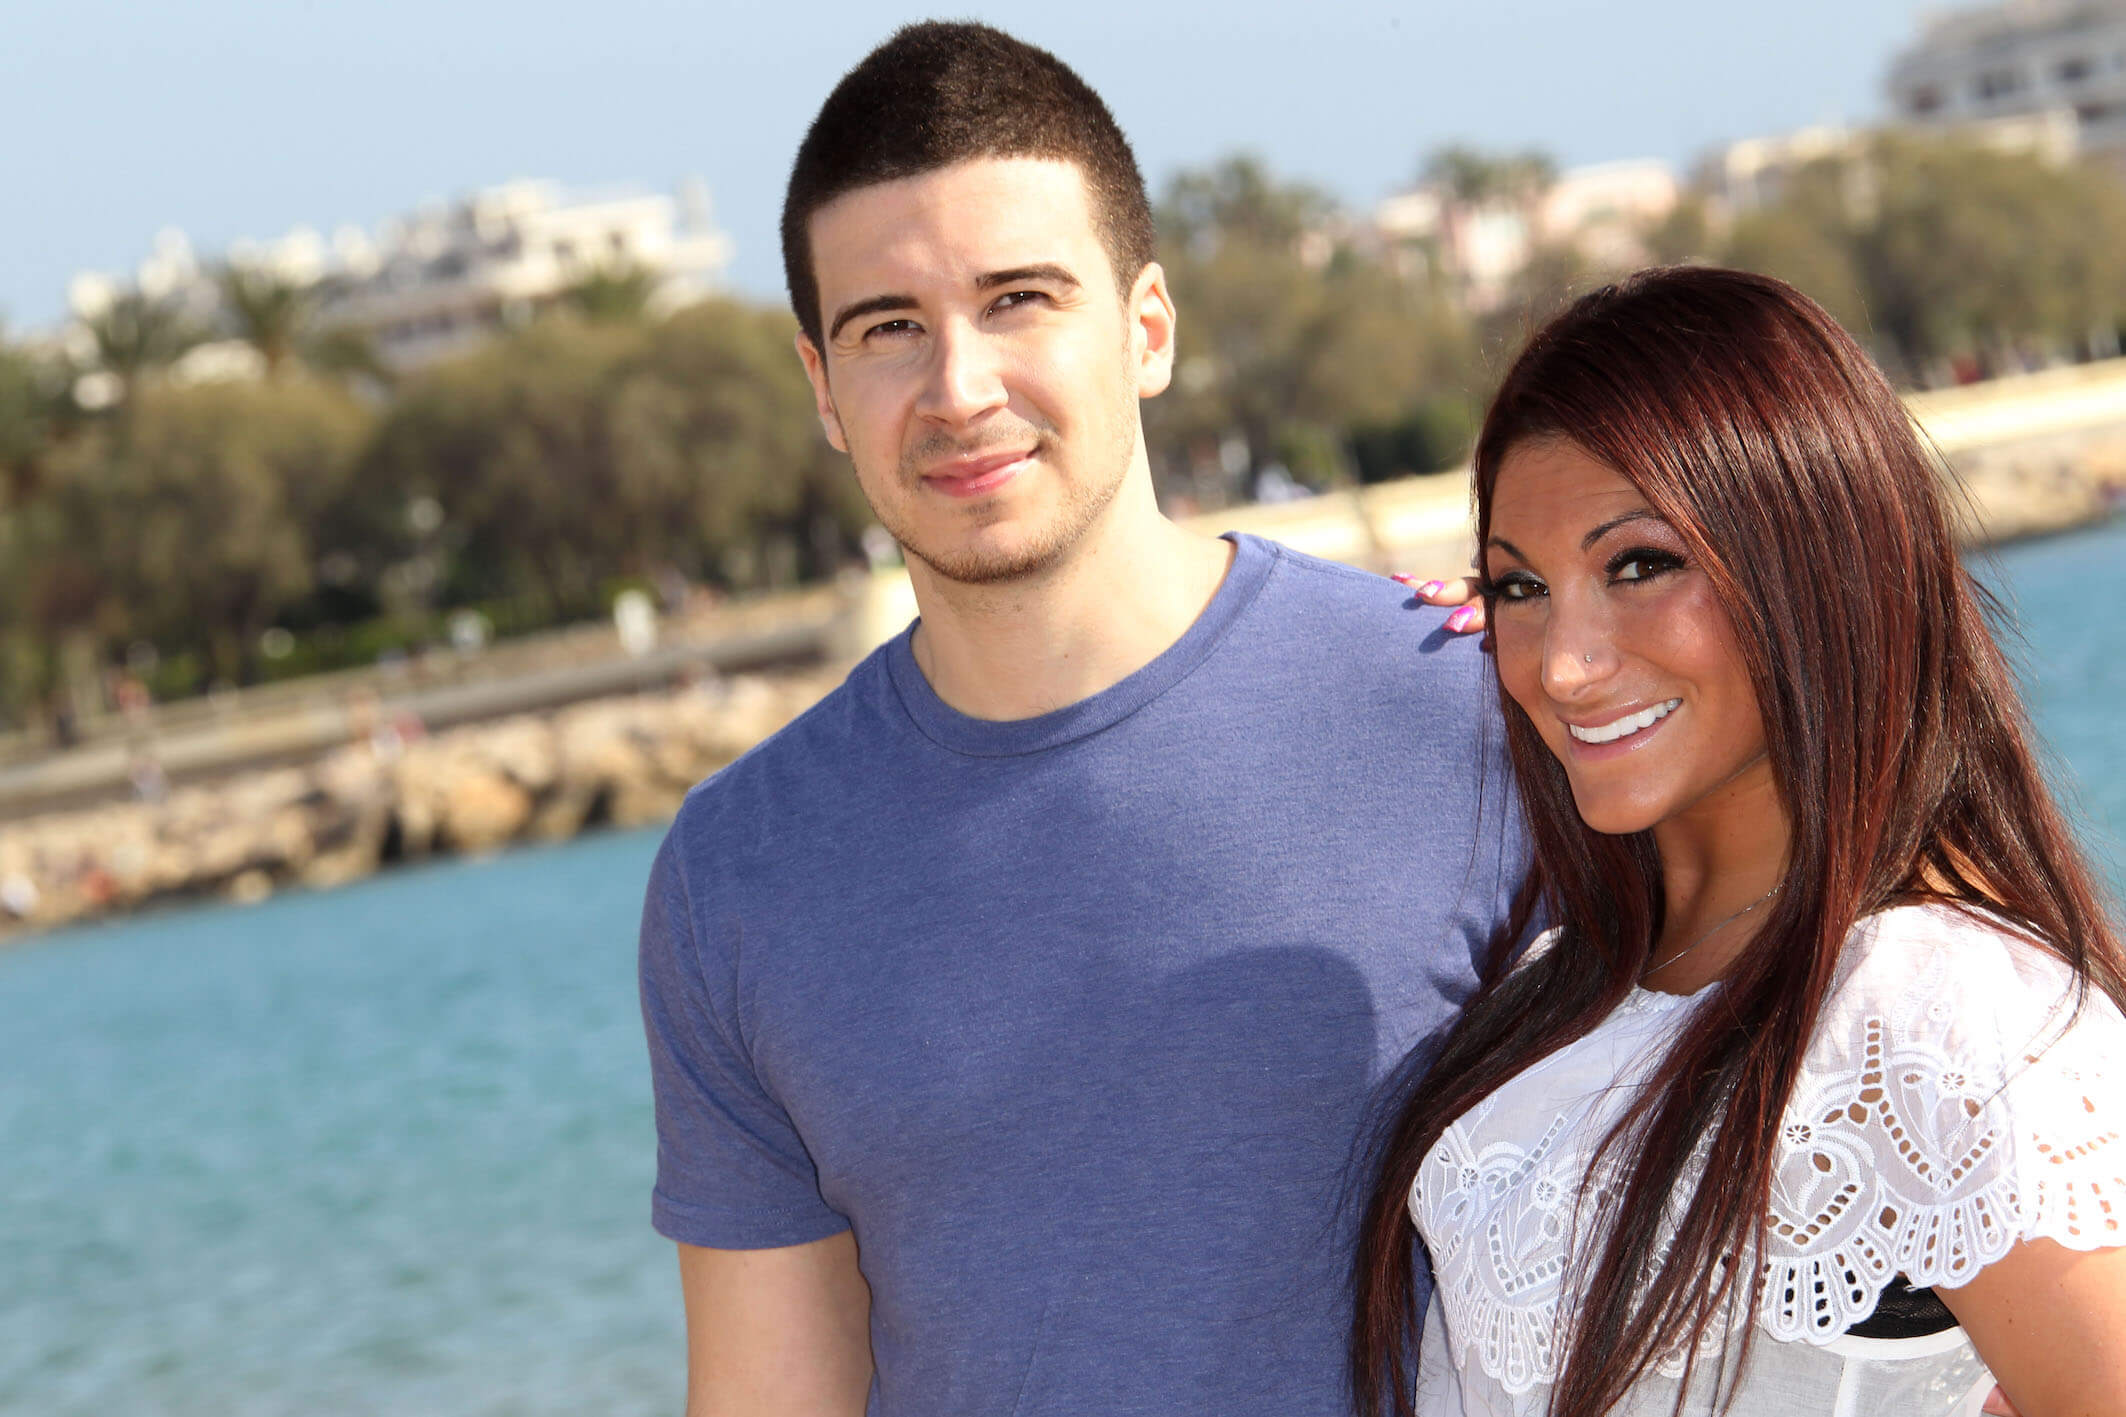 'Jersey Shore: Family Vacation' Season 7 cast members Deena Nicole Cortese and Vinny Guadagnino smiling next to each other while posing outside in 2012